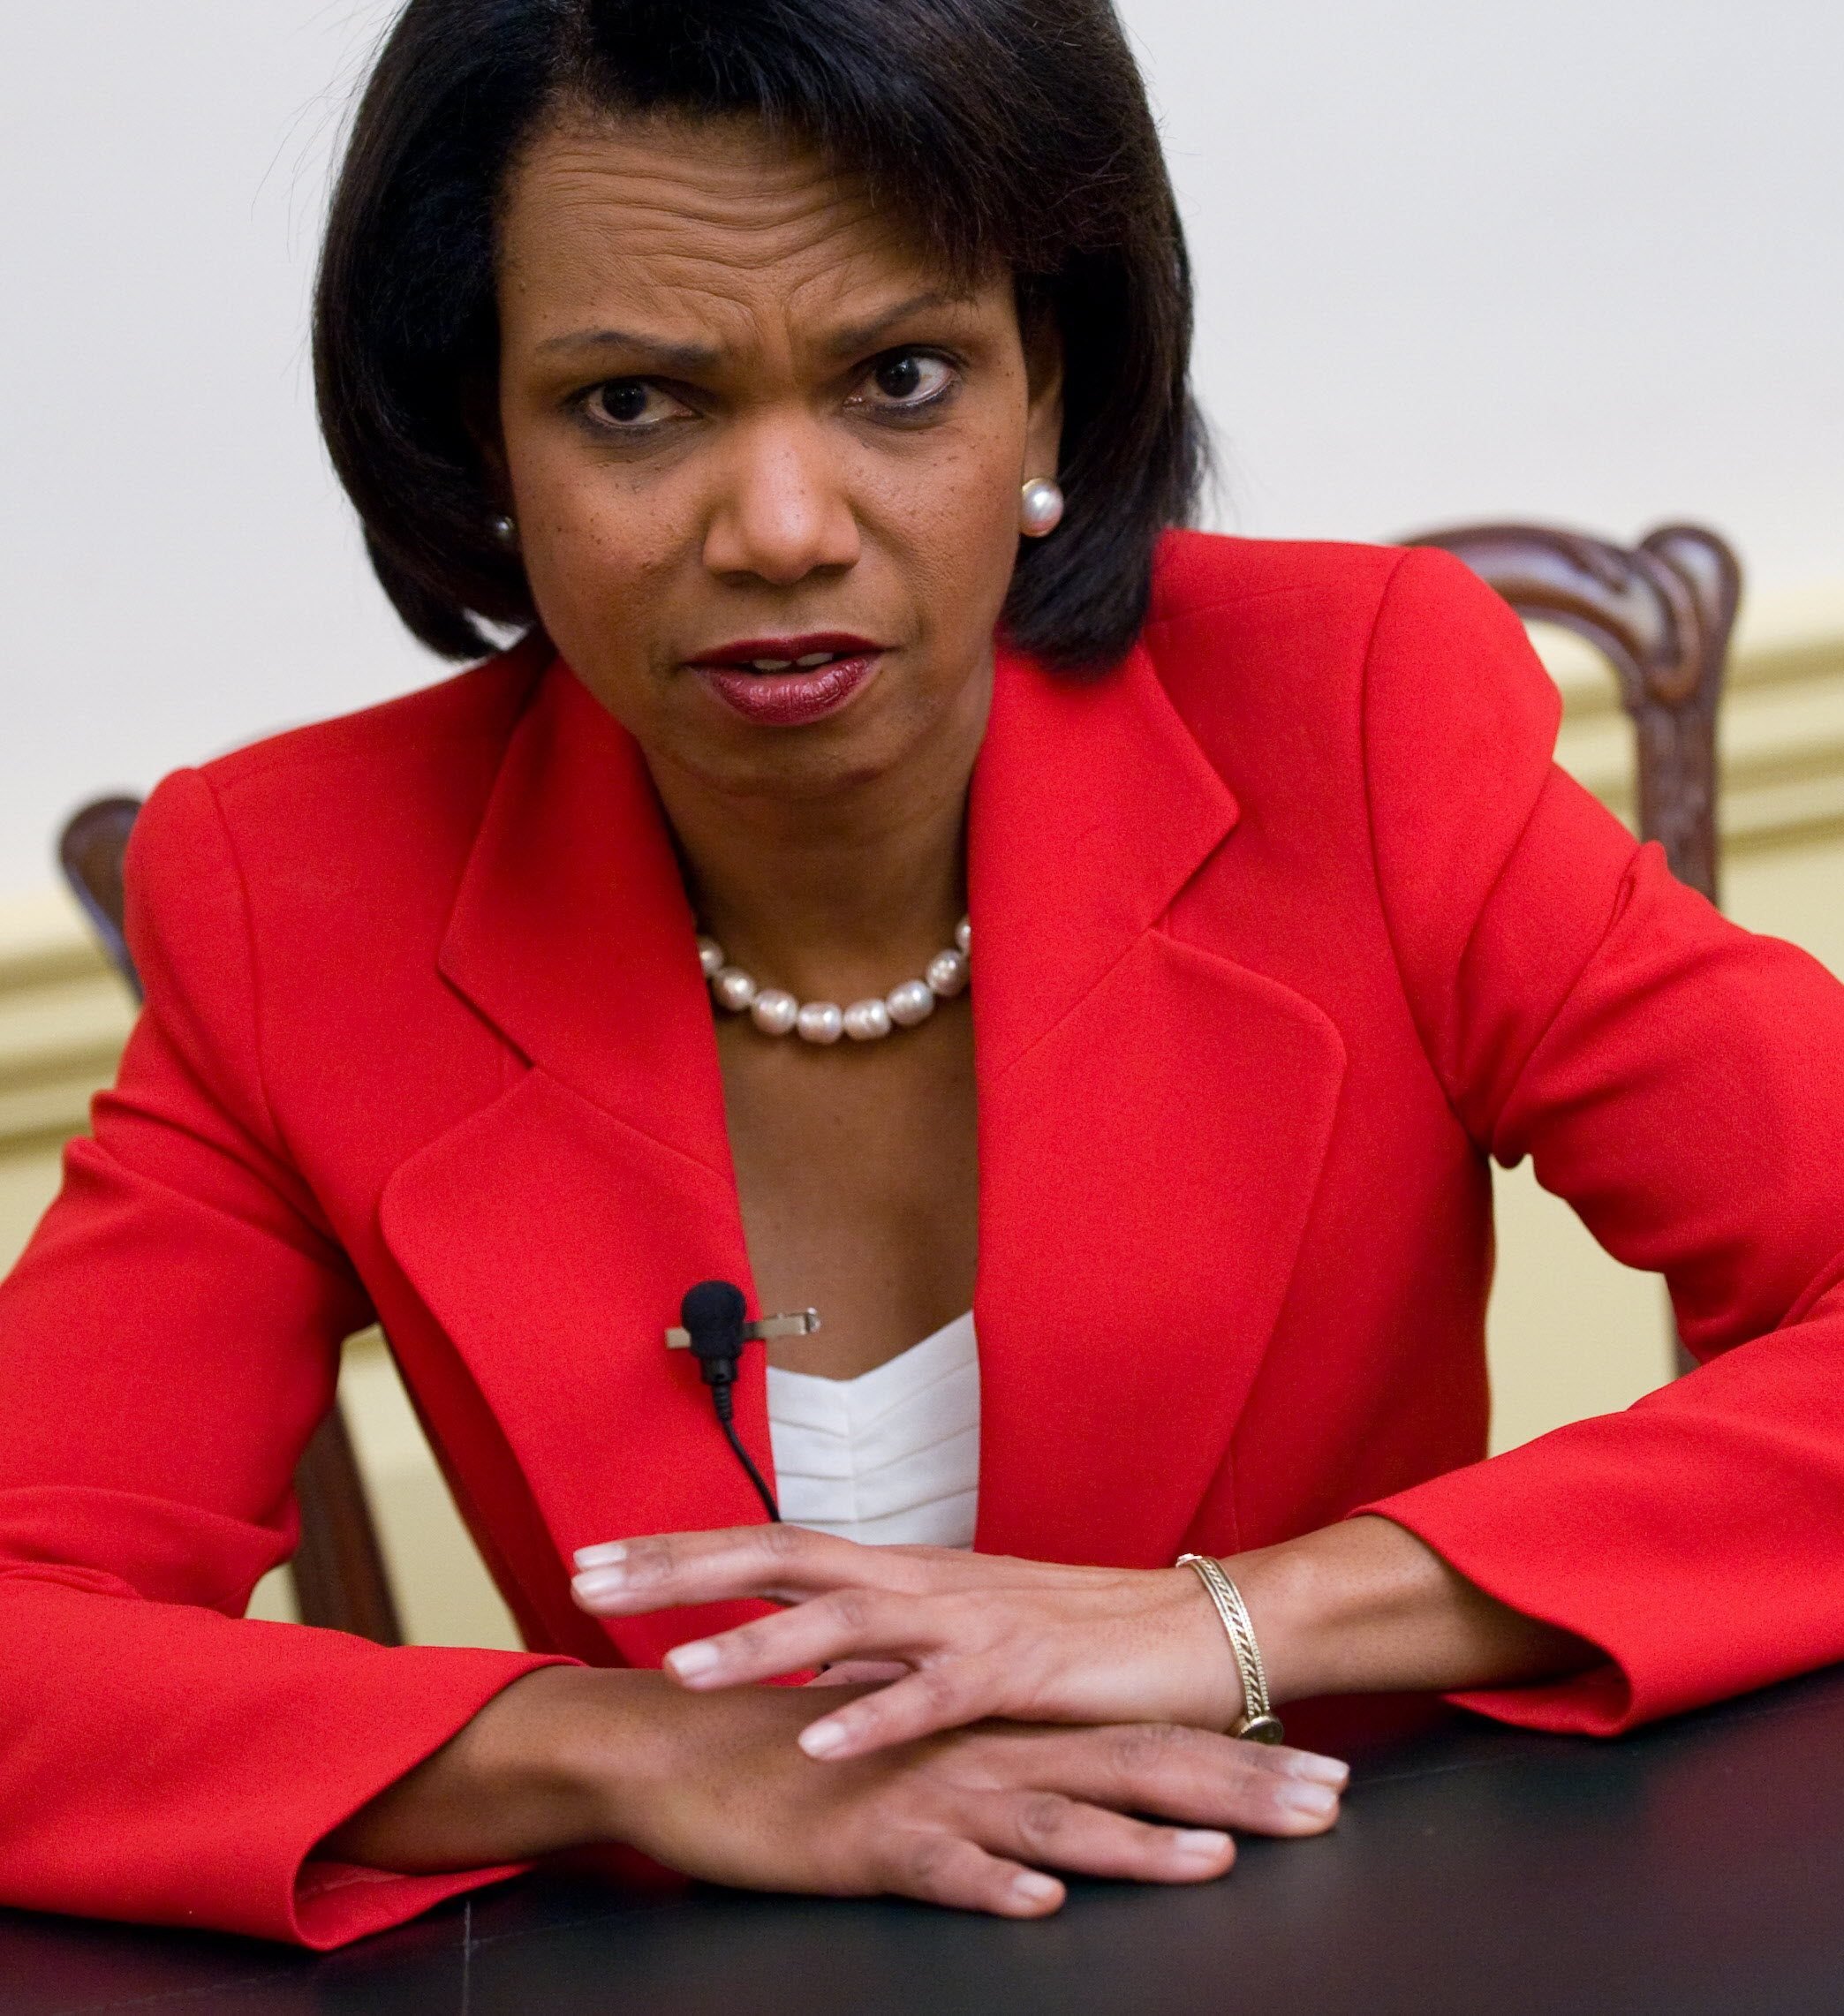 Former US secretary of state Condoleezza Rice speaks at the State Department in Washington, DC, in 2008. Rice now directs the Hoover Institution at Stanford University. Photo: AFP